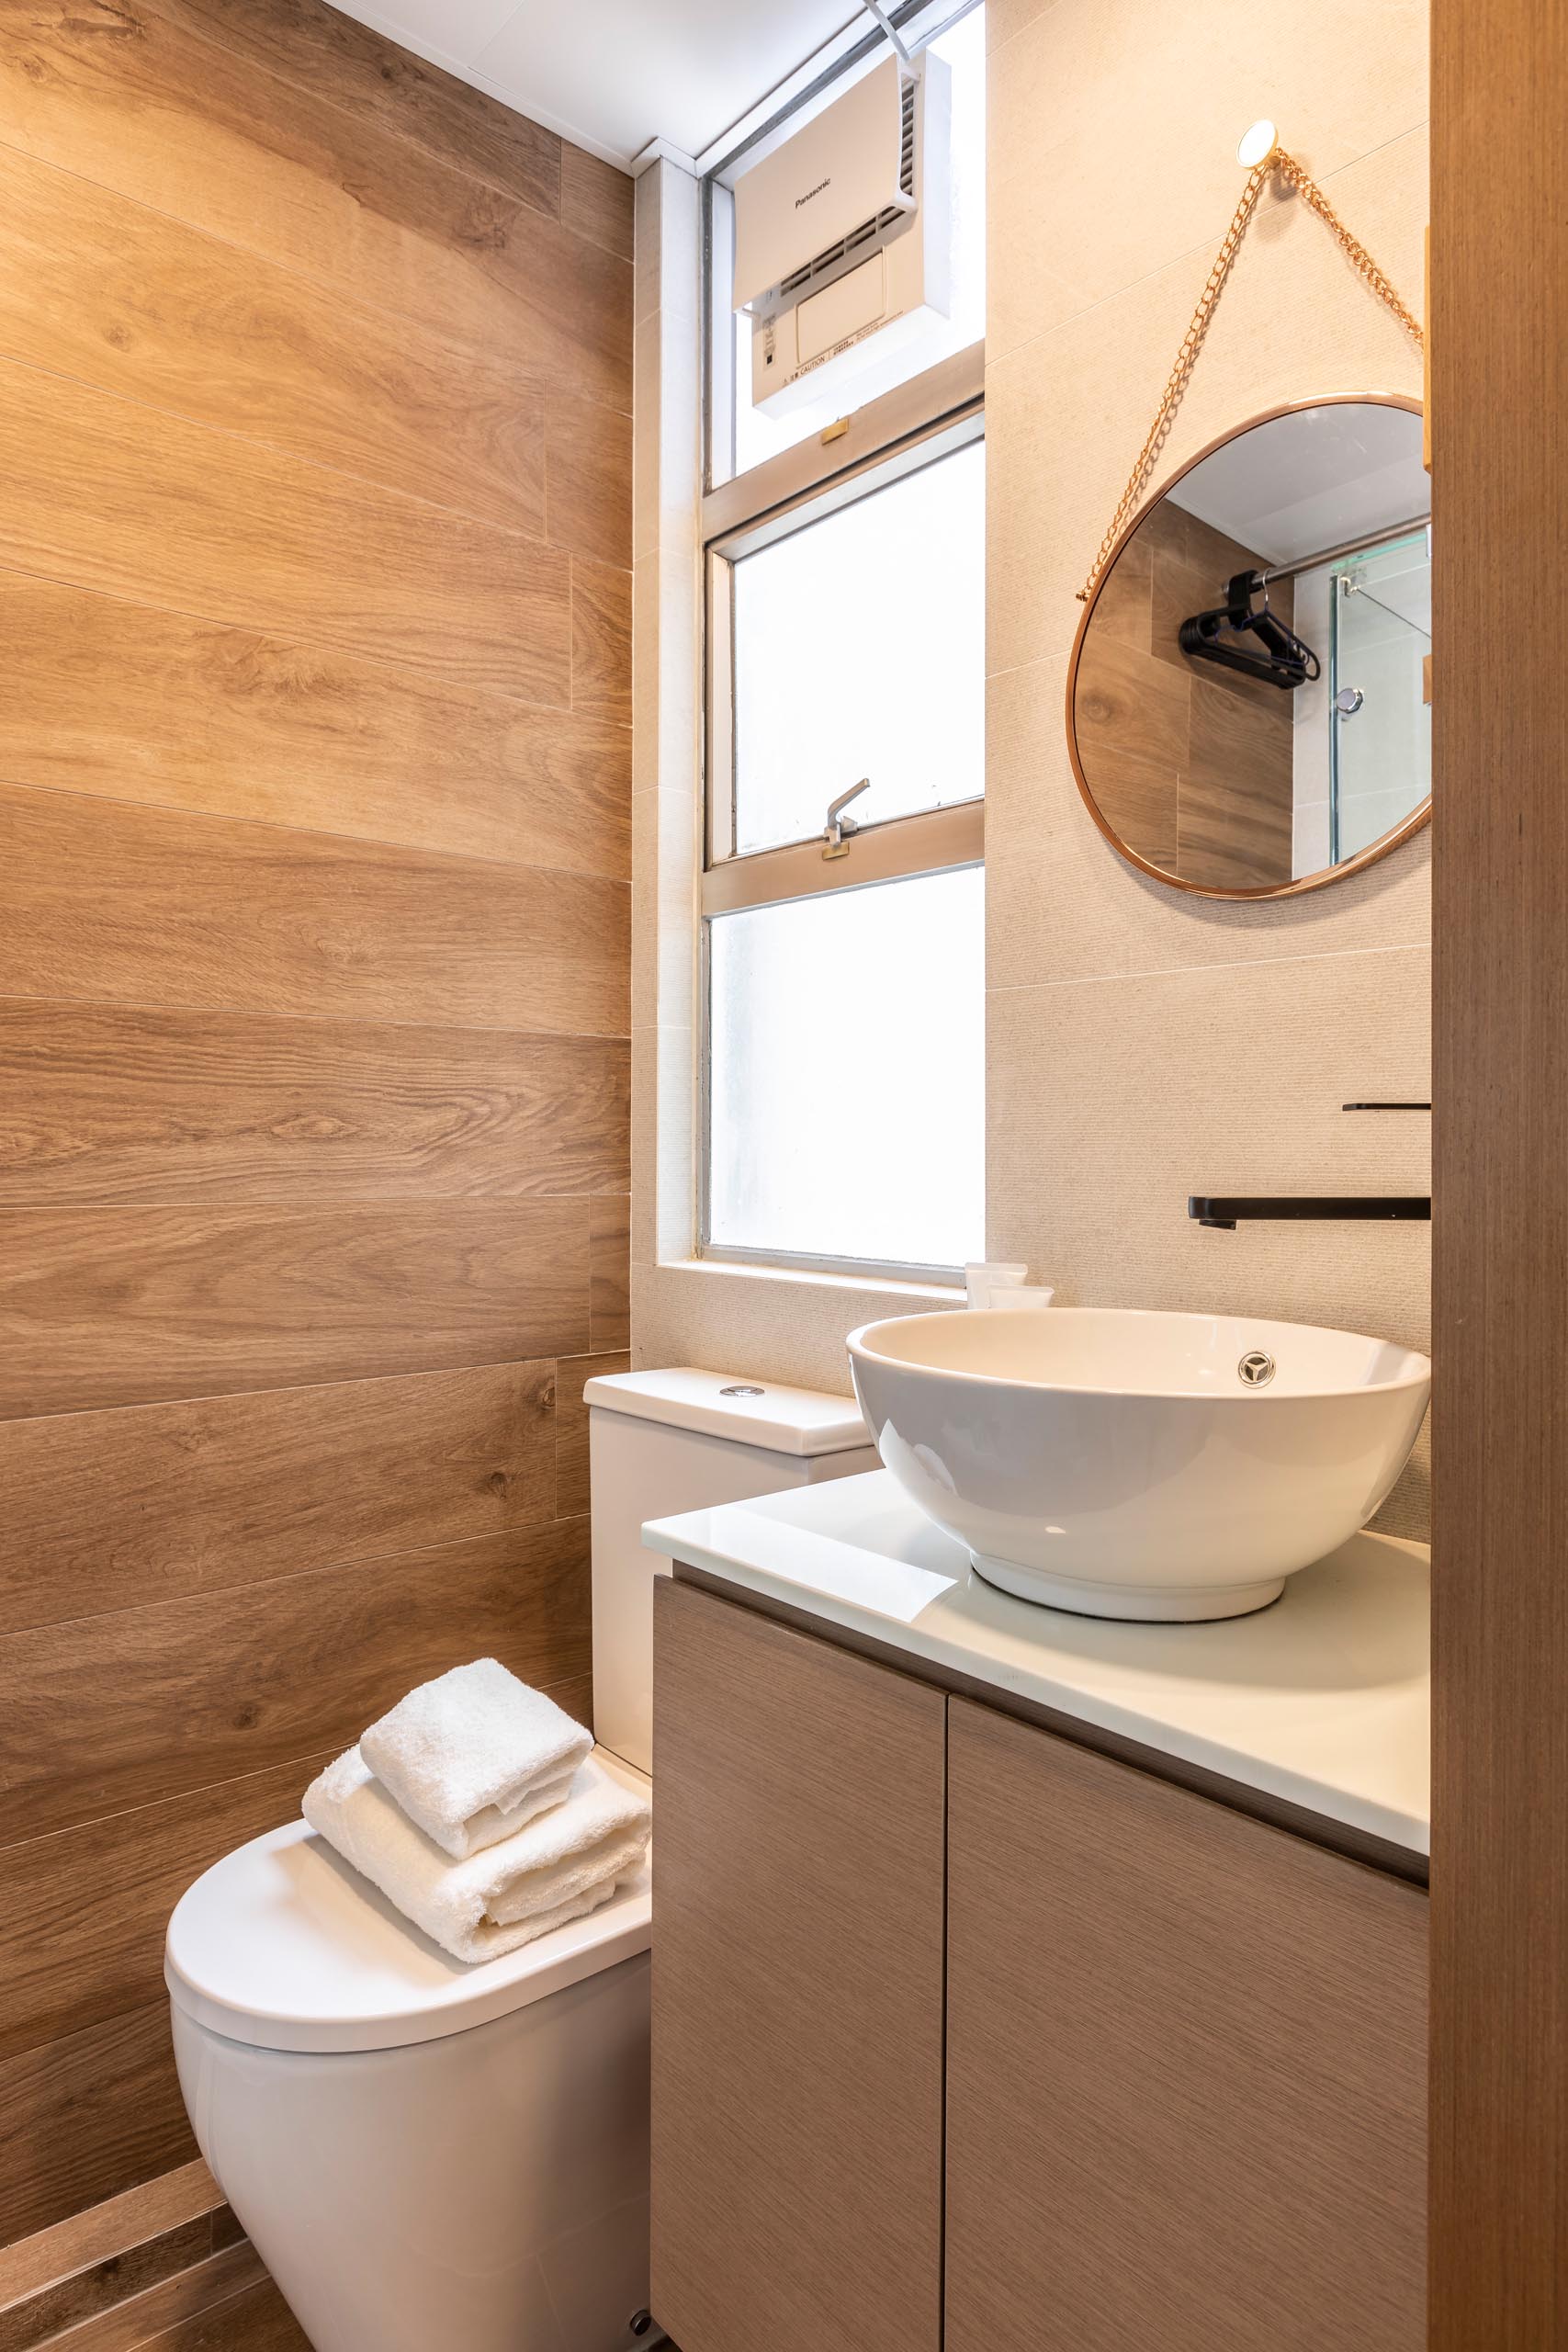 This modern bathroom in a small apartment includes a wood accent wall and a glass-enclosed shower.